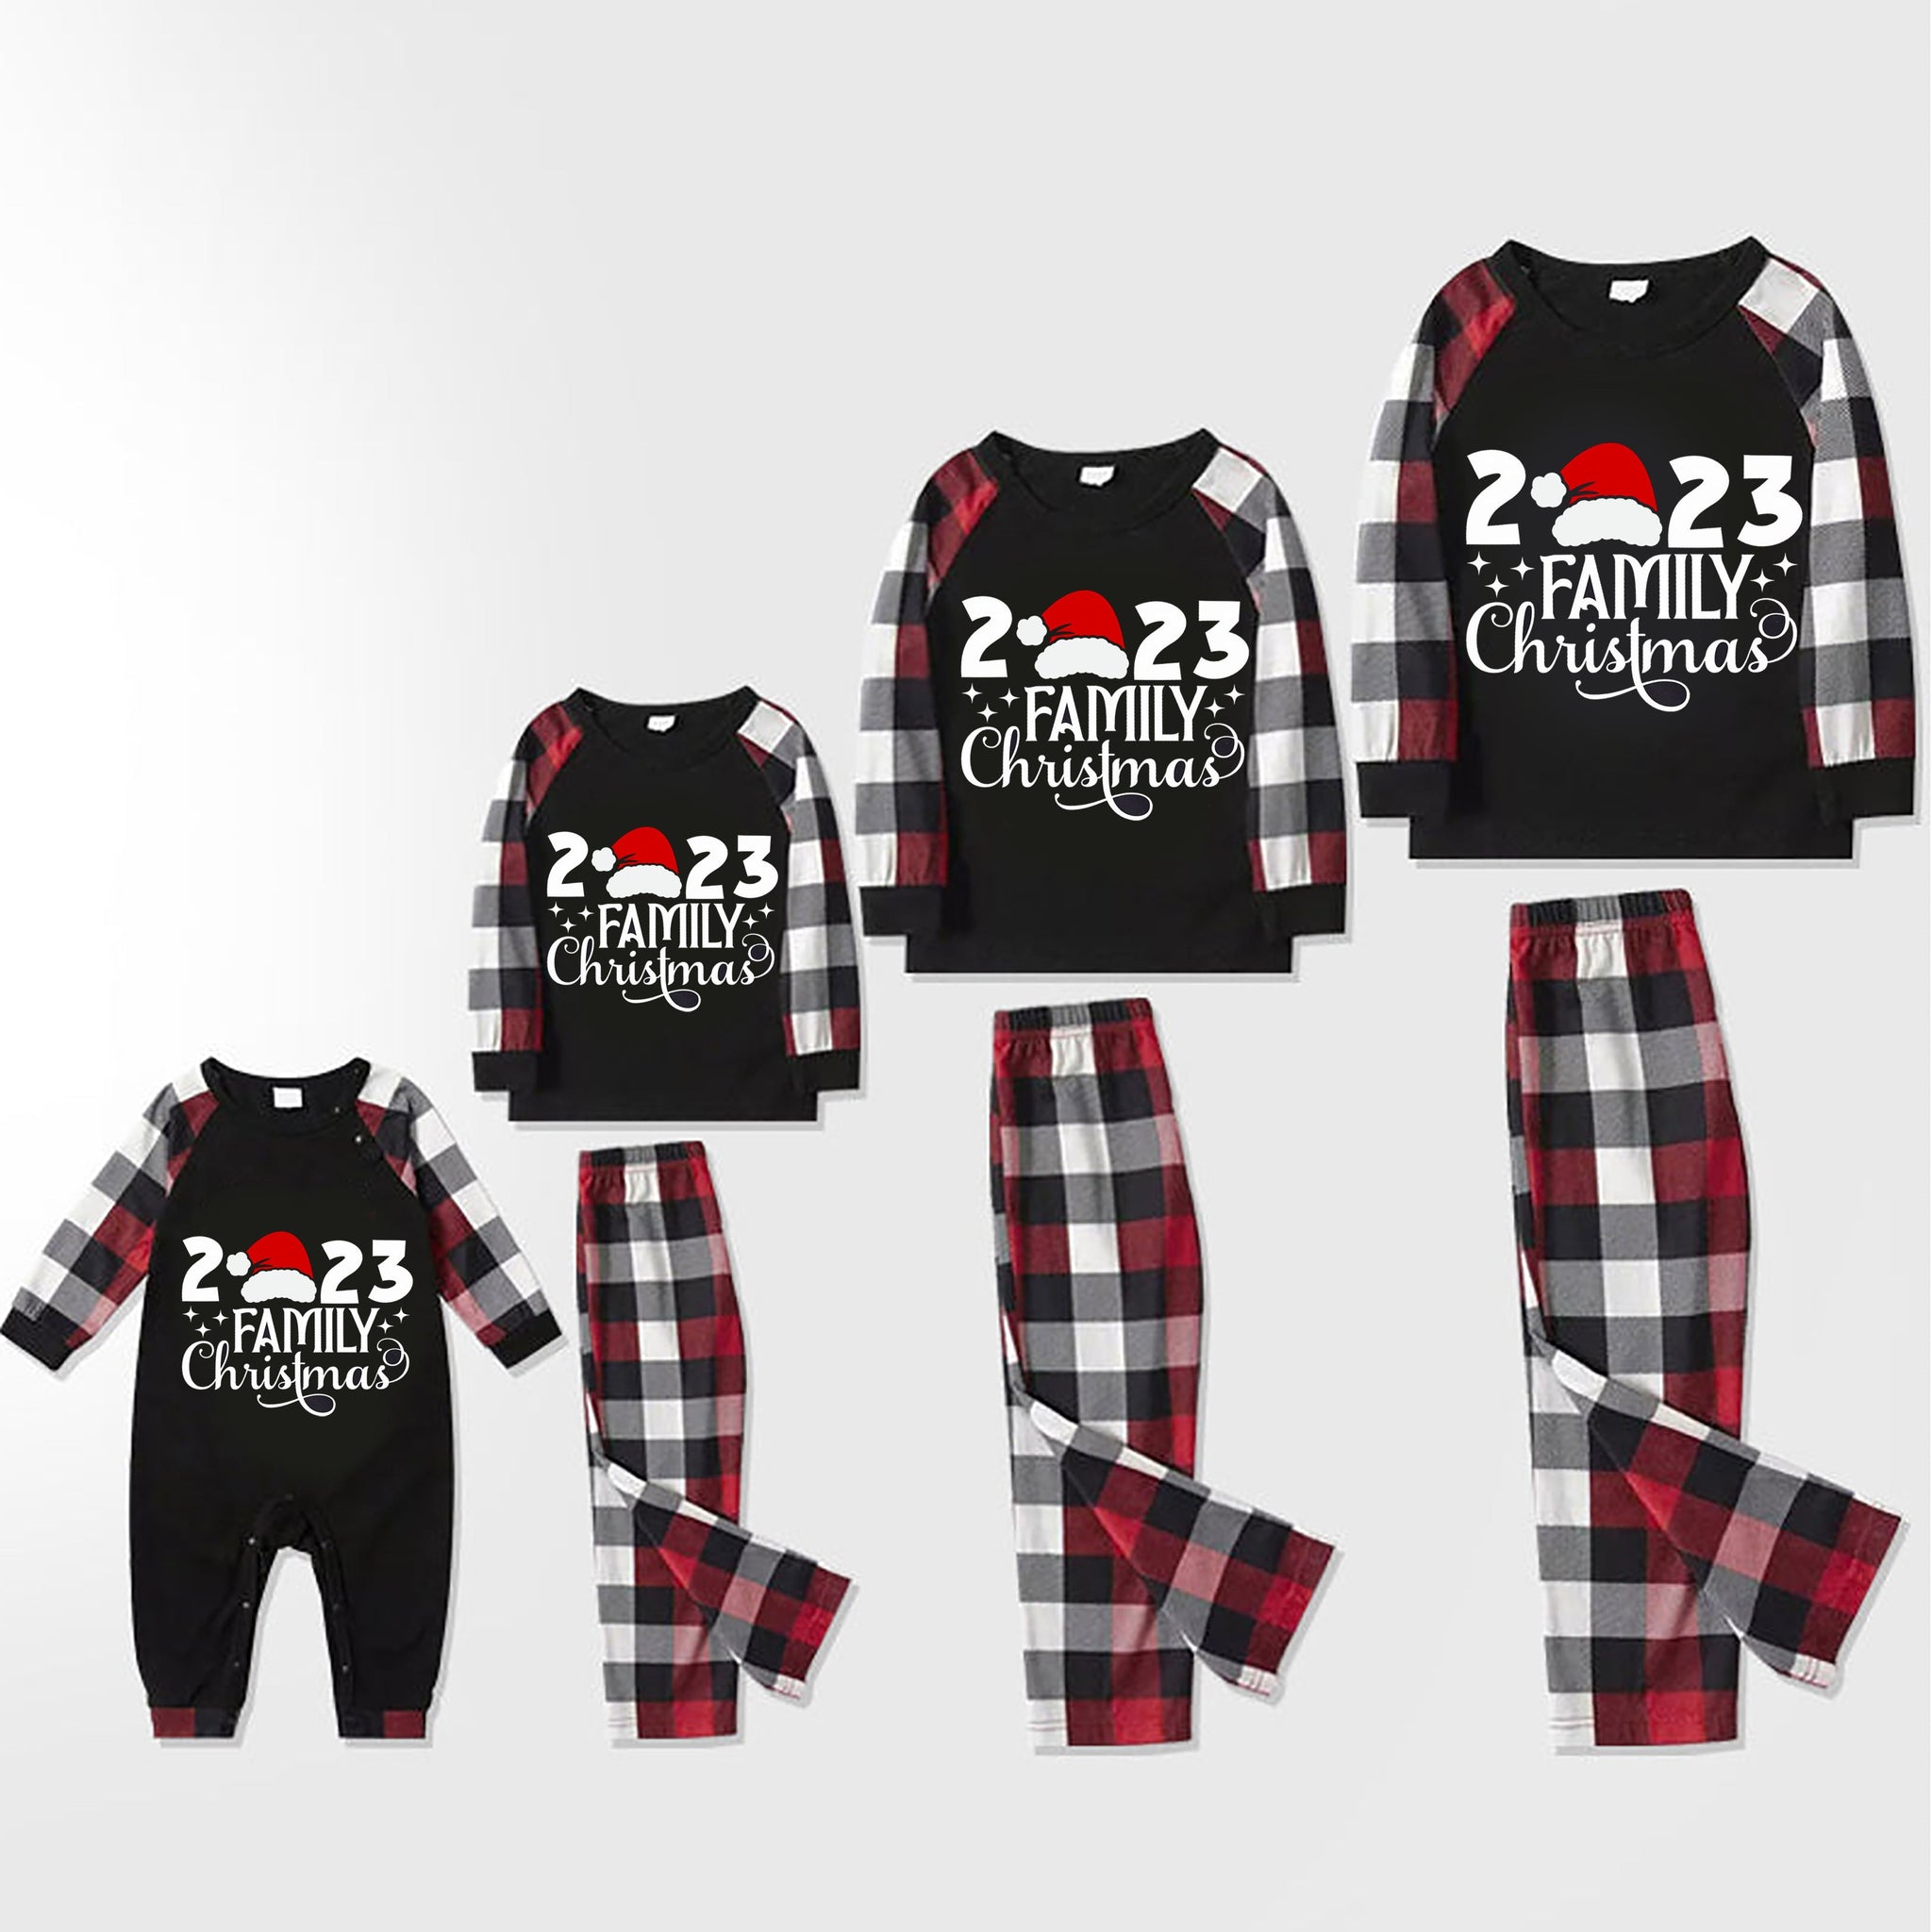 Christmas Cute Cartoon Santa Hat Patterned and '2023 FAMILY Christmas ' Letter Print Contrast Tops and Red & Black & White Plaid Pants Family Matching Pajamas Set With Dog Bandana